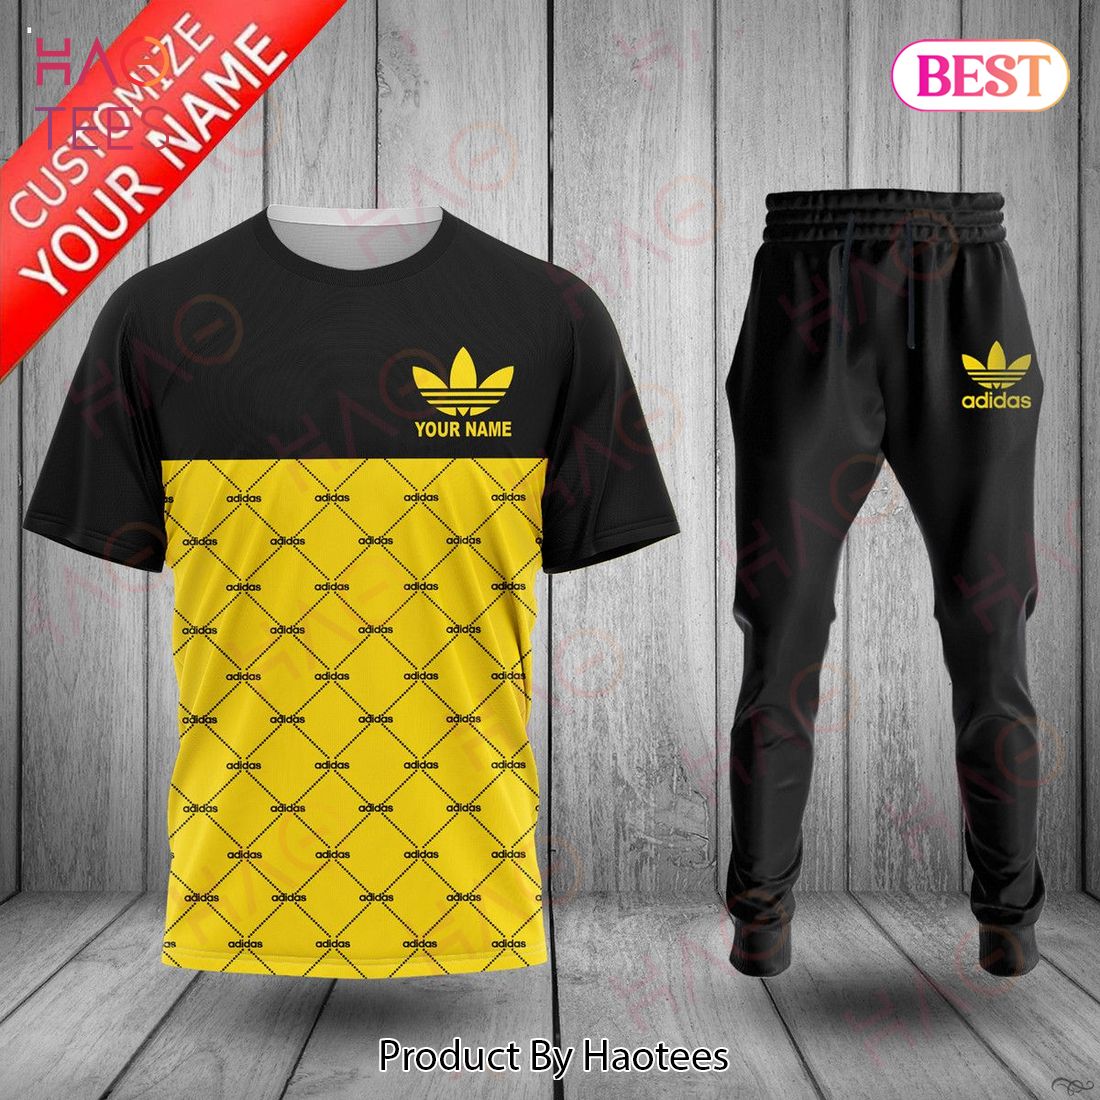 Adidas Gold Mix Black Luxury Brand T-Shirt And Pants Limited Edition